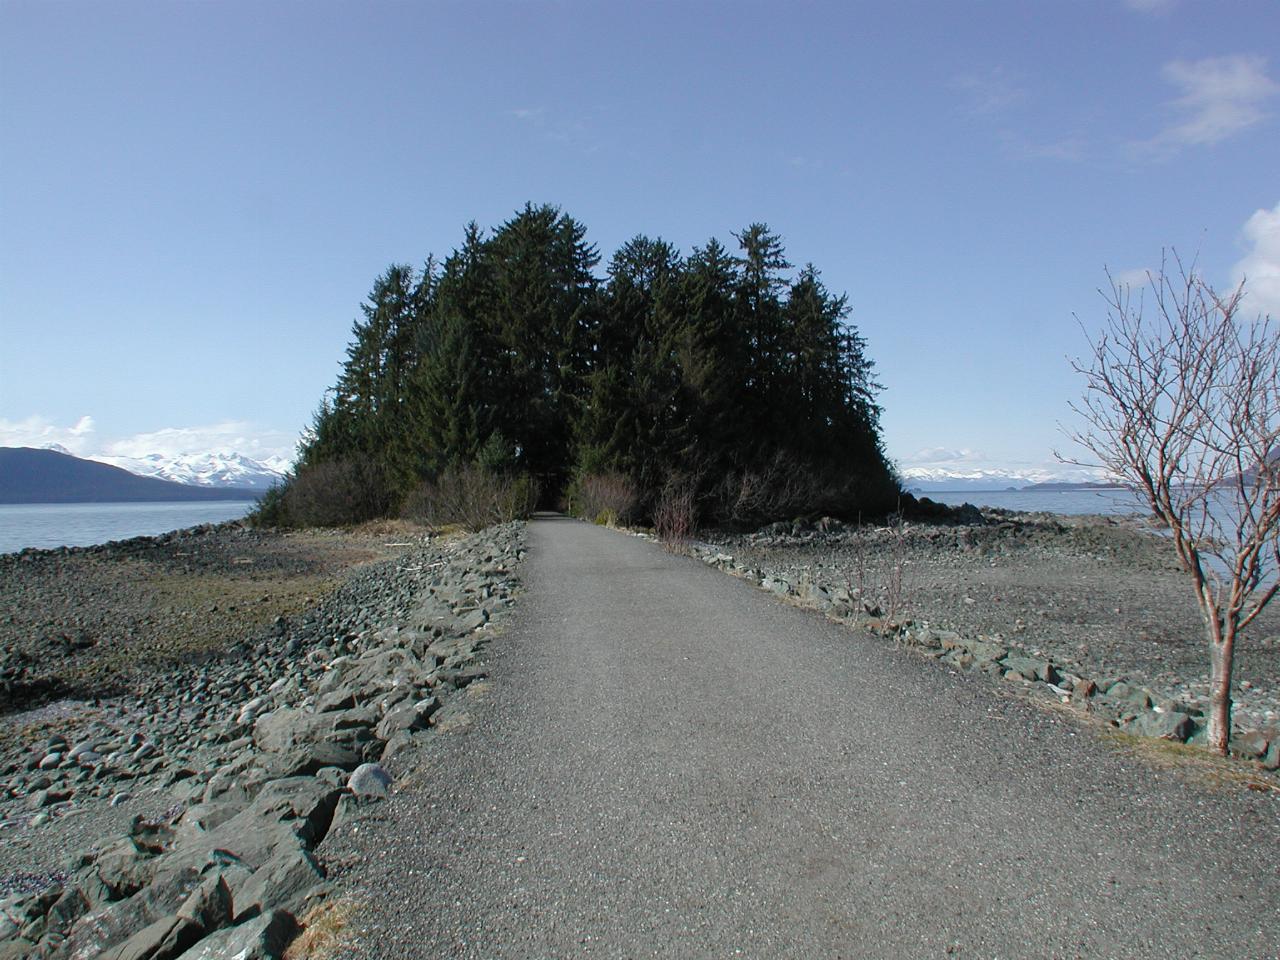 The island containing the Shrine of St. Terese, north of Juneau